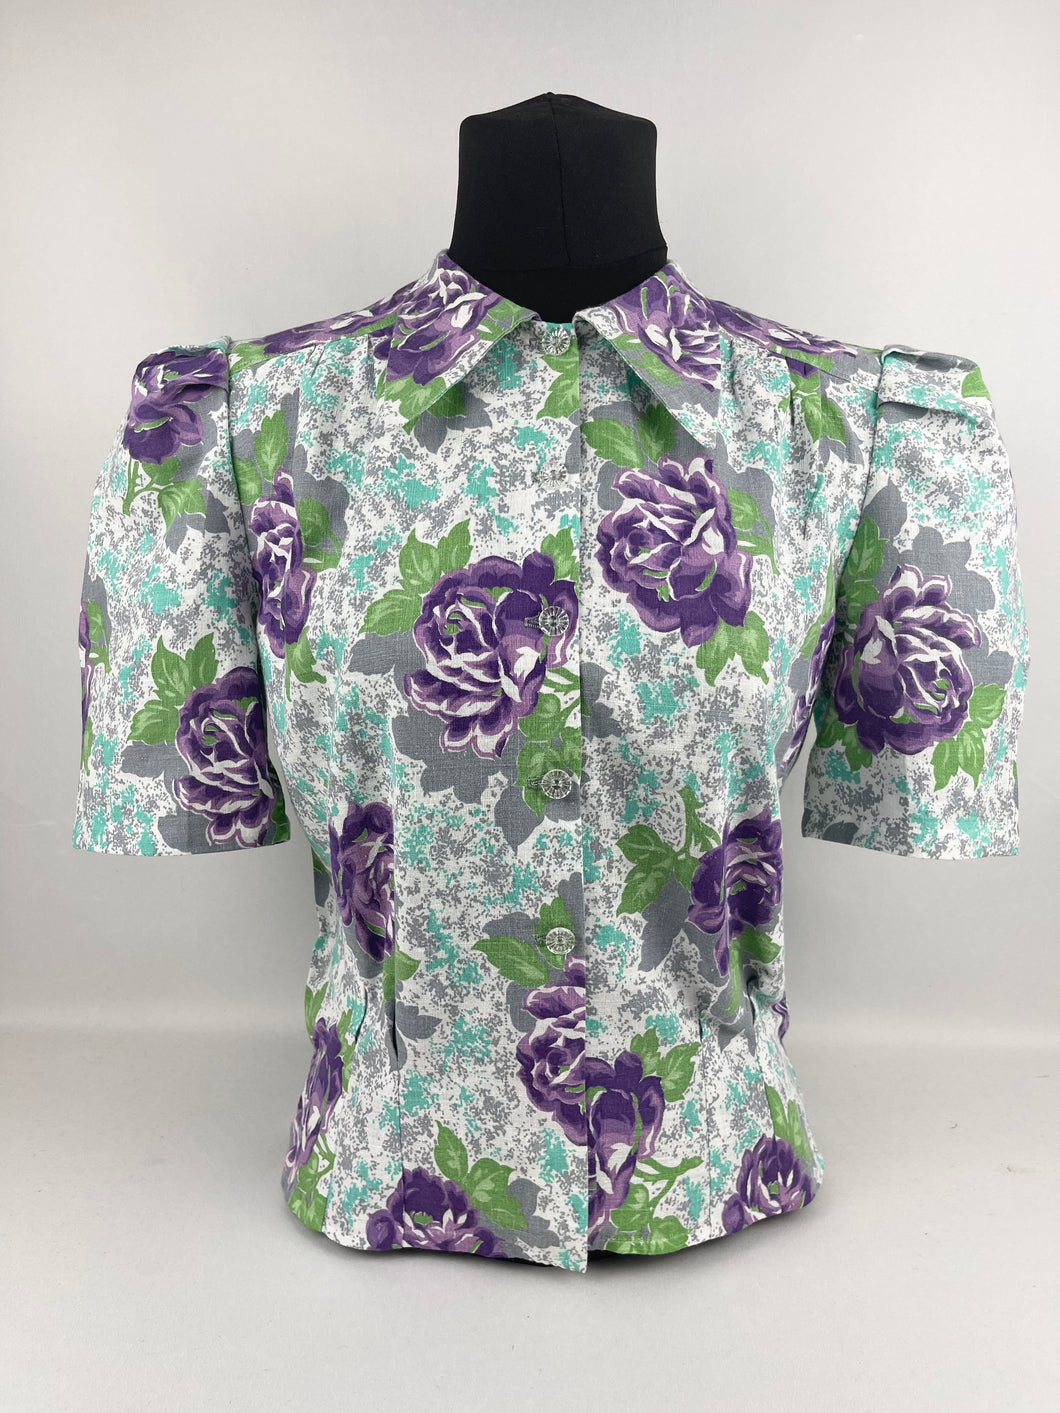 1940's Reproduction Floral Print Blouse with Large Purple Roses and Faceted Glass Buttons Made From an Original 1940's Feed Sack - Bust 34